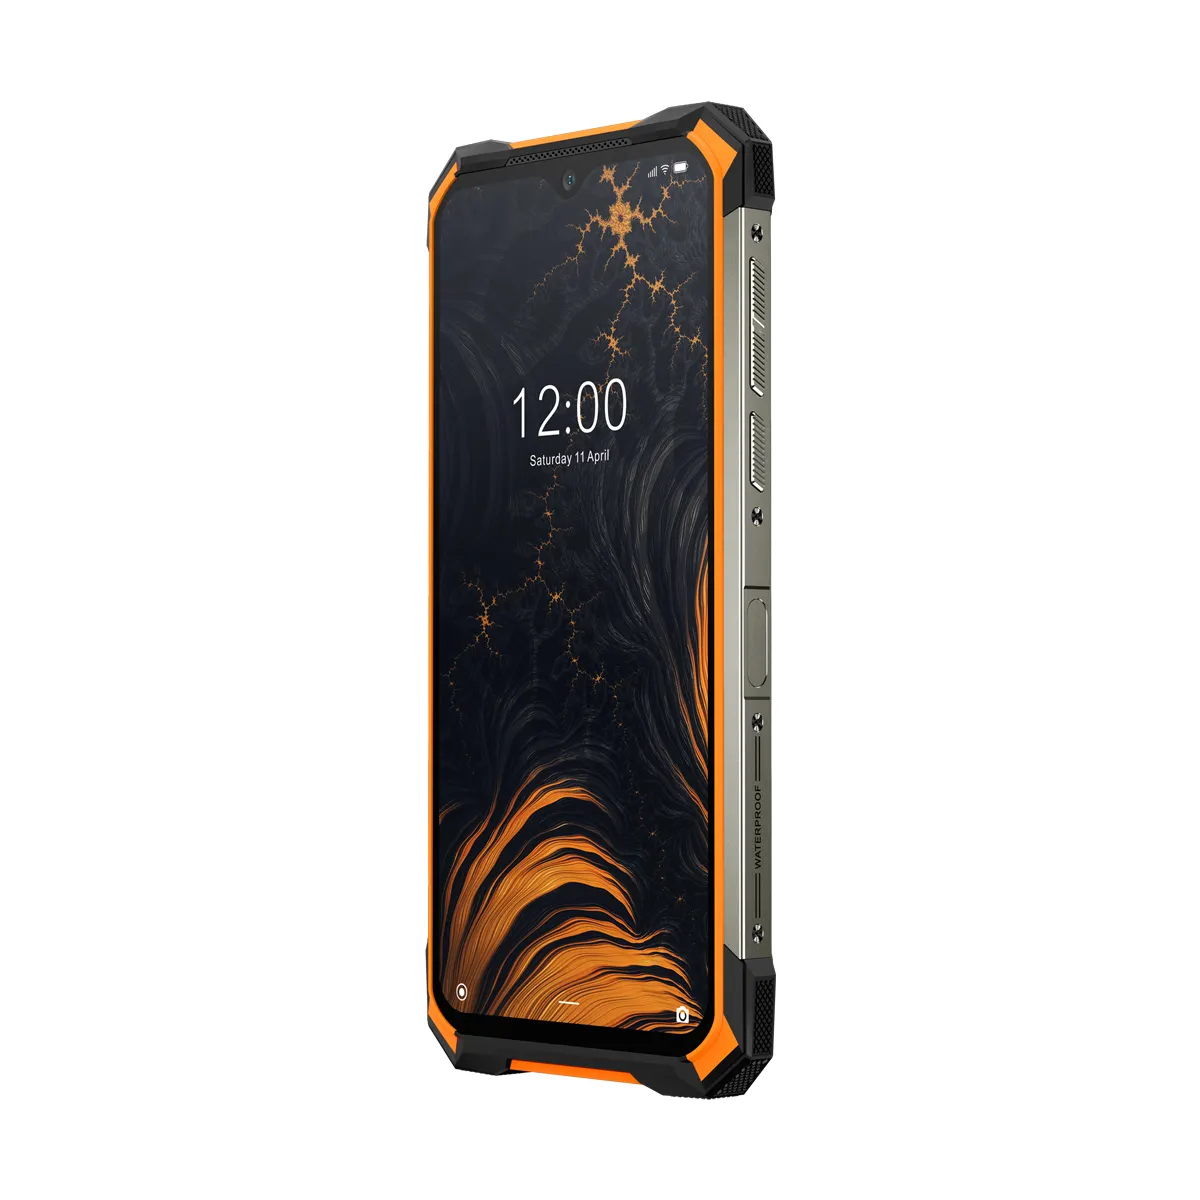 DOOGEE S88 Pro 4G Rugged Mobile Phone Octa Core Android 10.0 6GB+128GB 10000mAh 6.3inch smartphone S88 pro